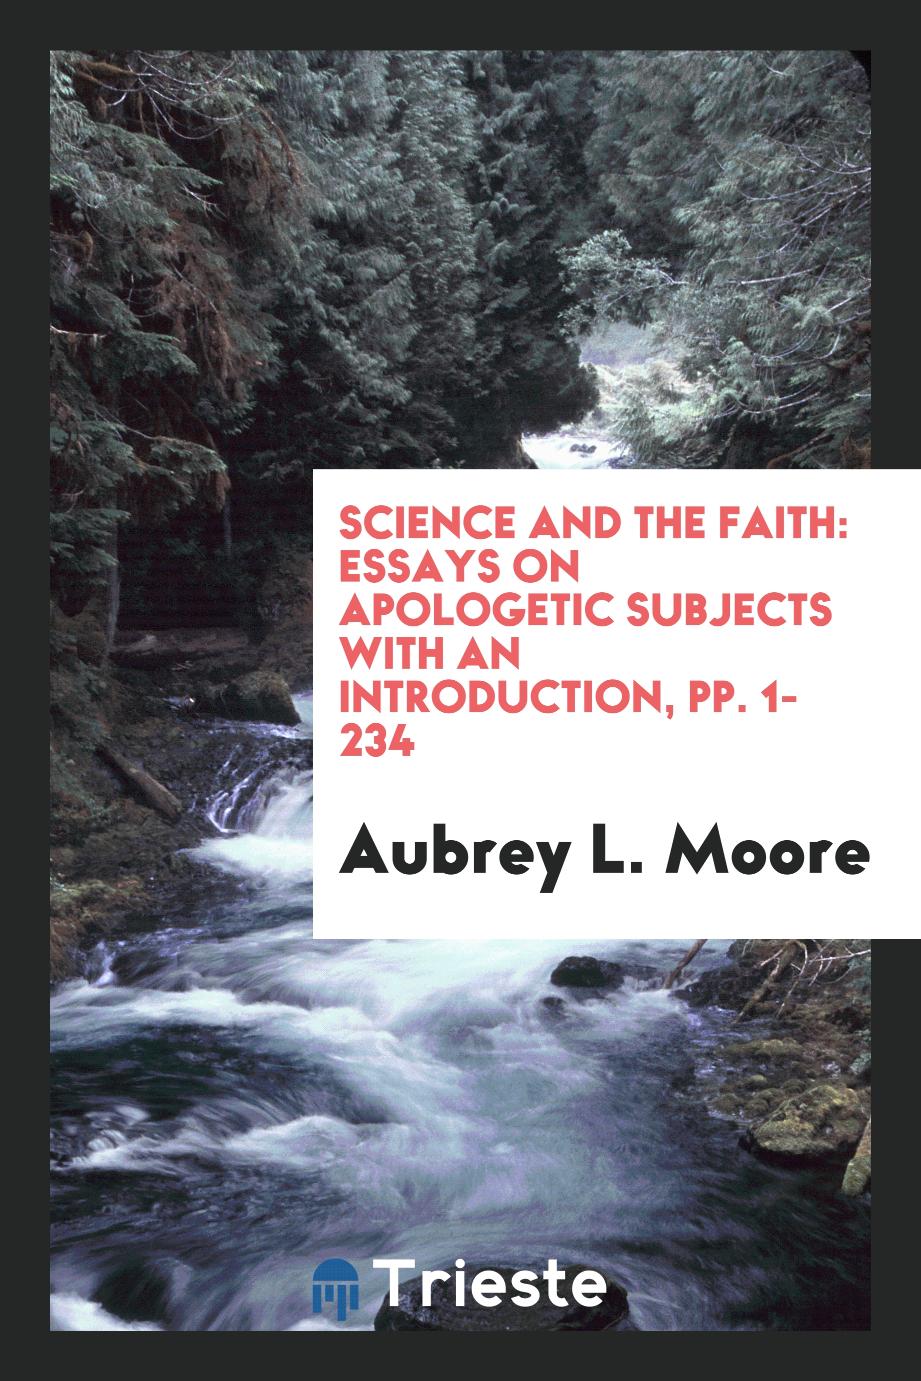 Science and the Faith: Essays on Apologetic Subjects with an Introduction, pp. 1-234